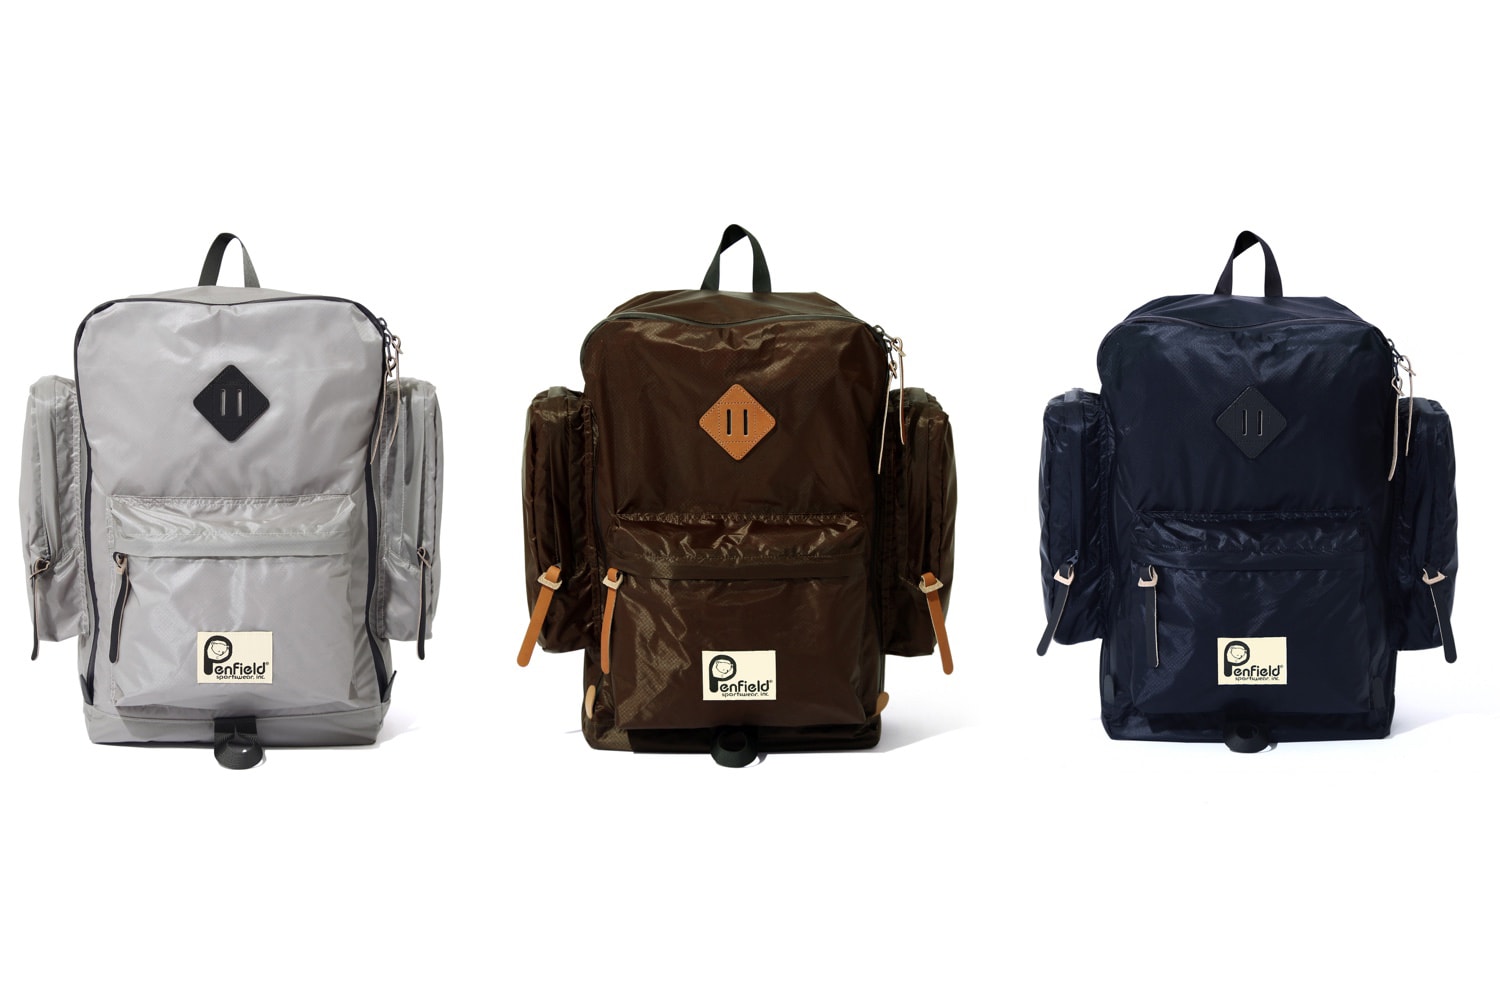 Penfield Launches Heritage Line & White Line | Hypebeast